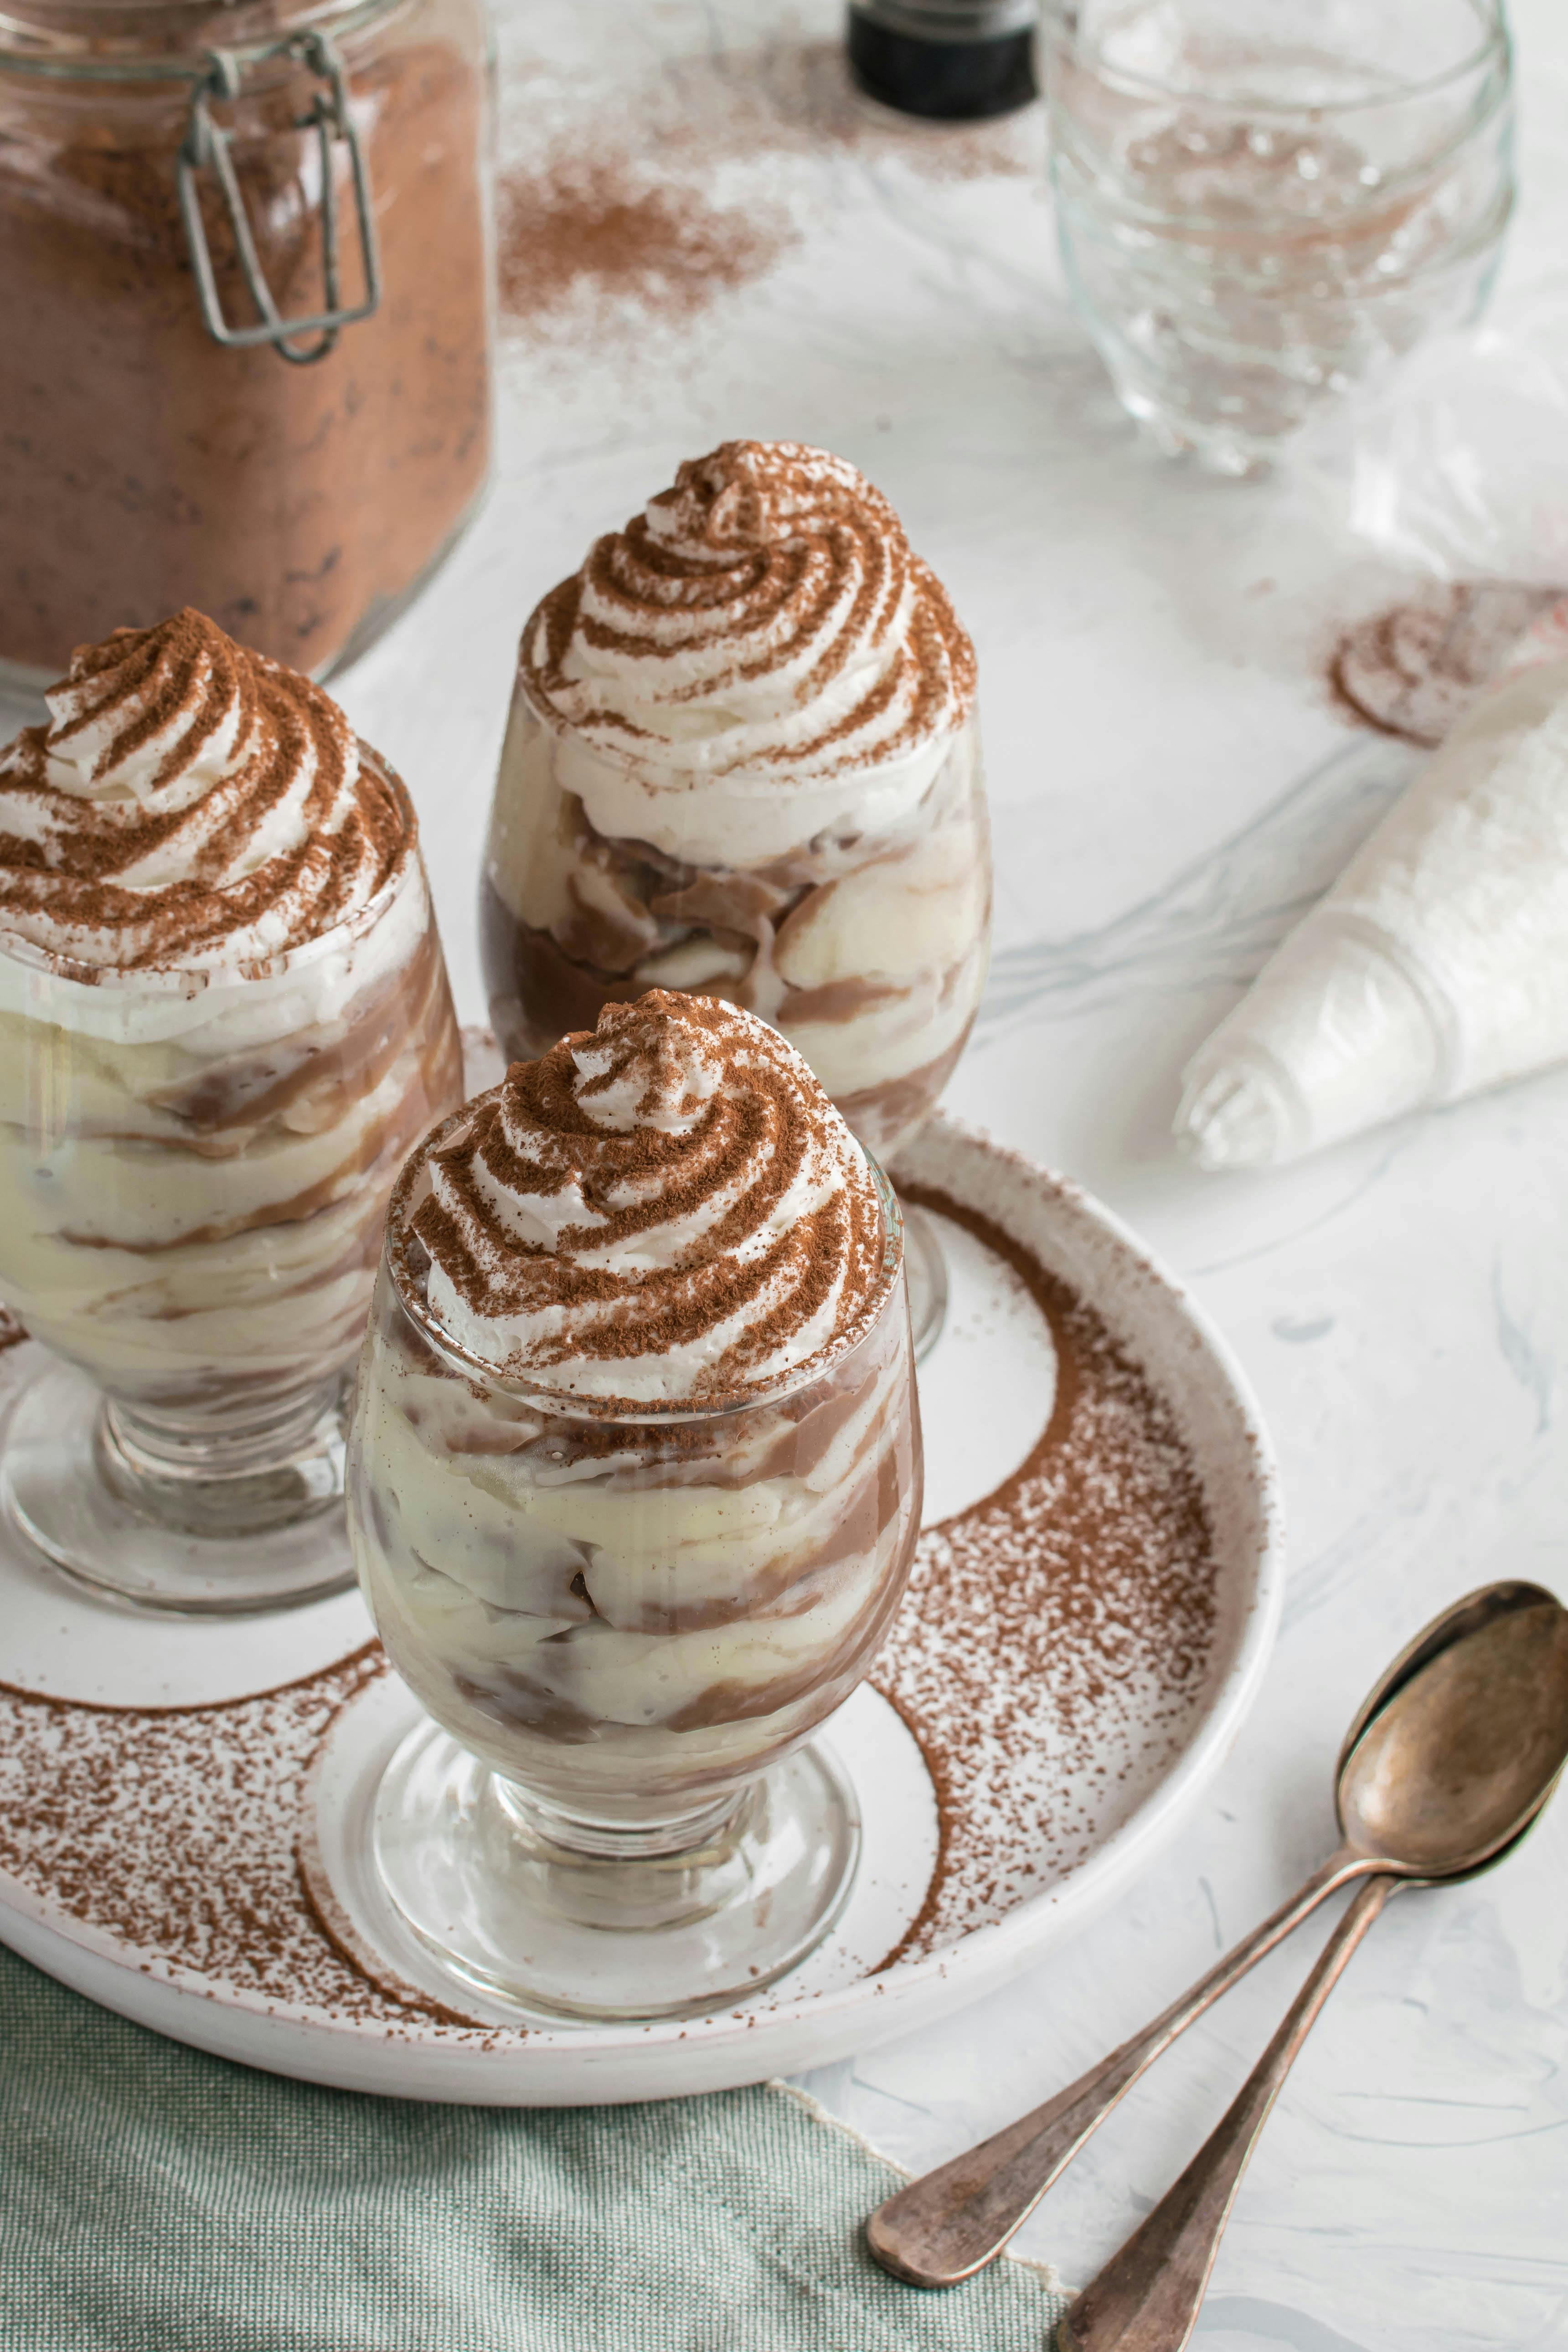 photo of three creamy desserts in a glasses covered in chocolate powder